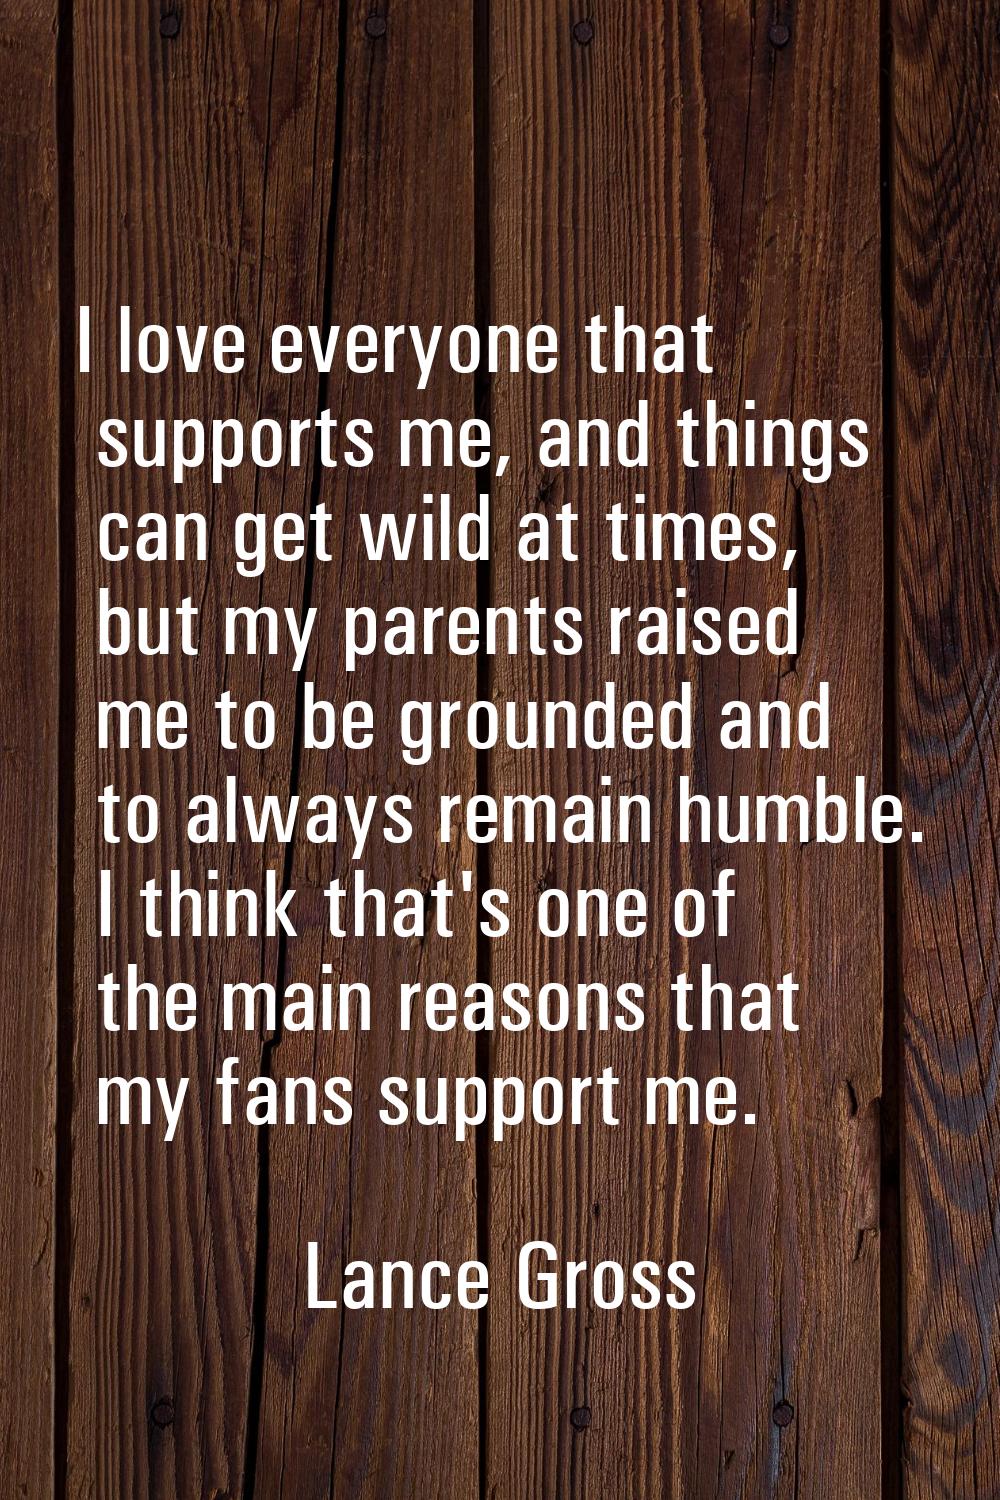 I love everyone that supports me, and things can get wild at times, but my parents raised me to be 